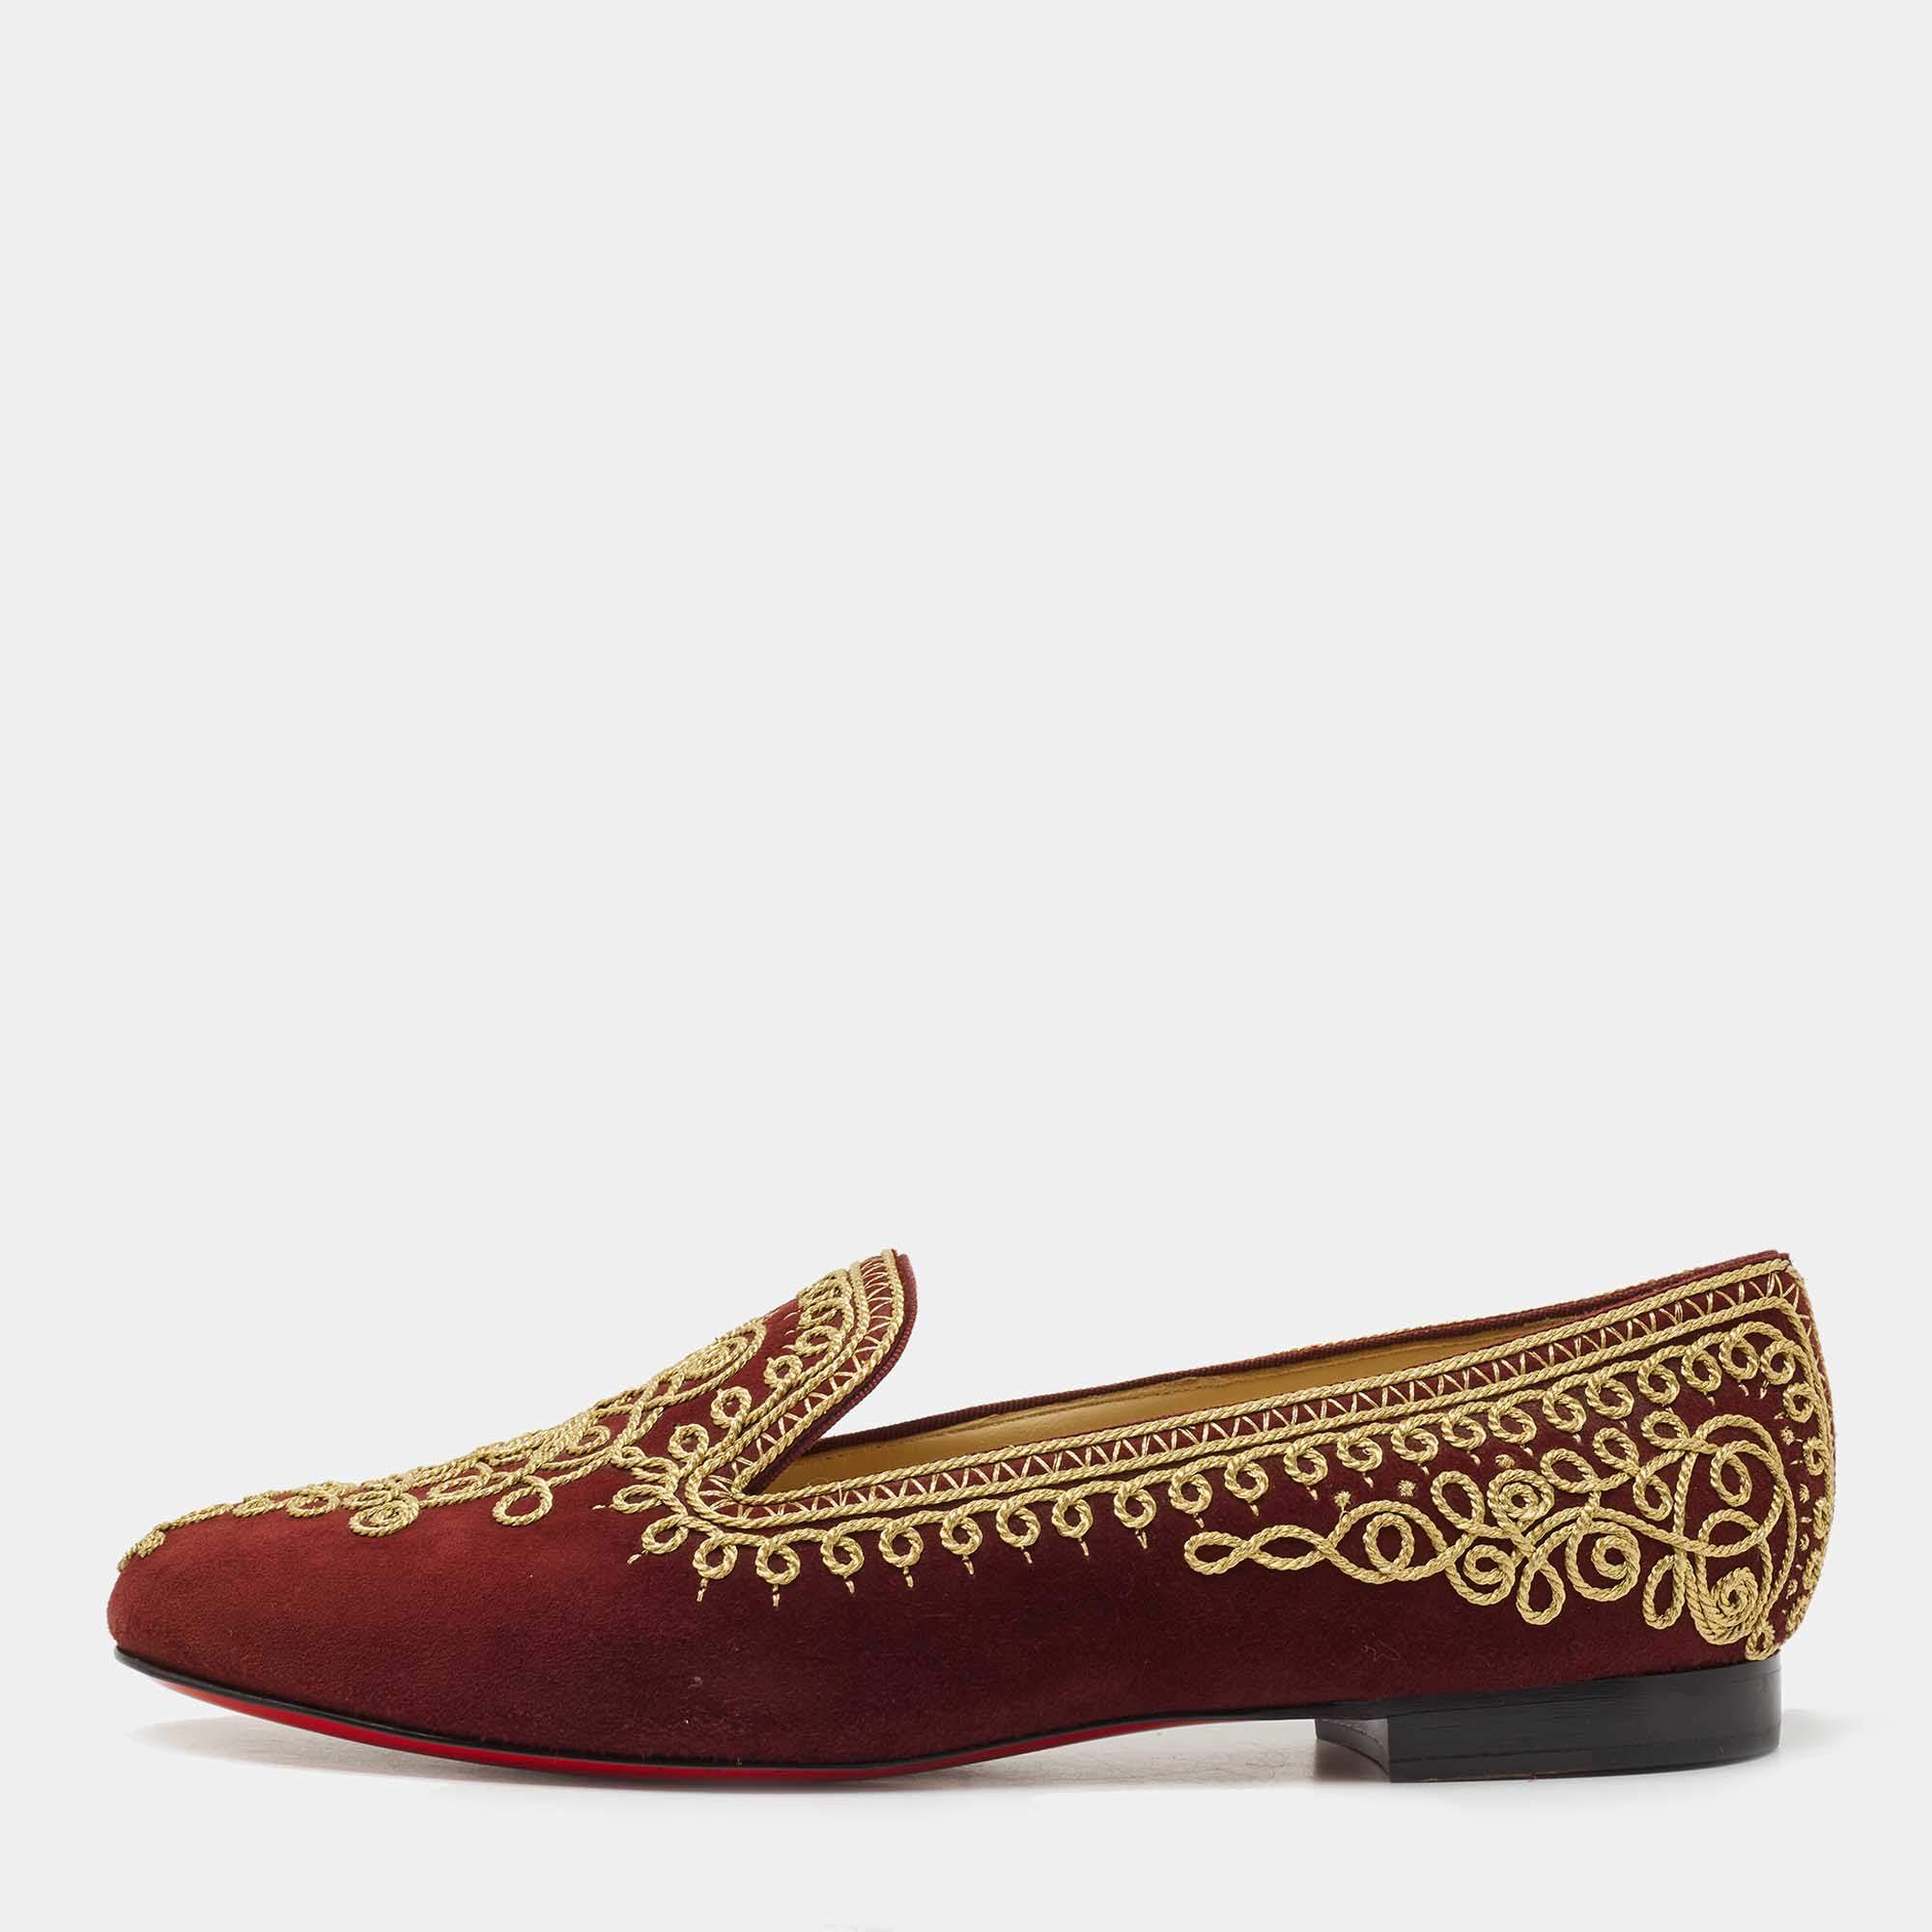 Christian Louboutin Burgundy Embroidered Suede Mamounia Smoking Slippers Size 40.5